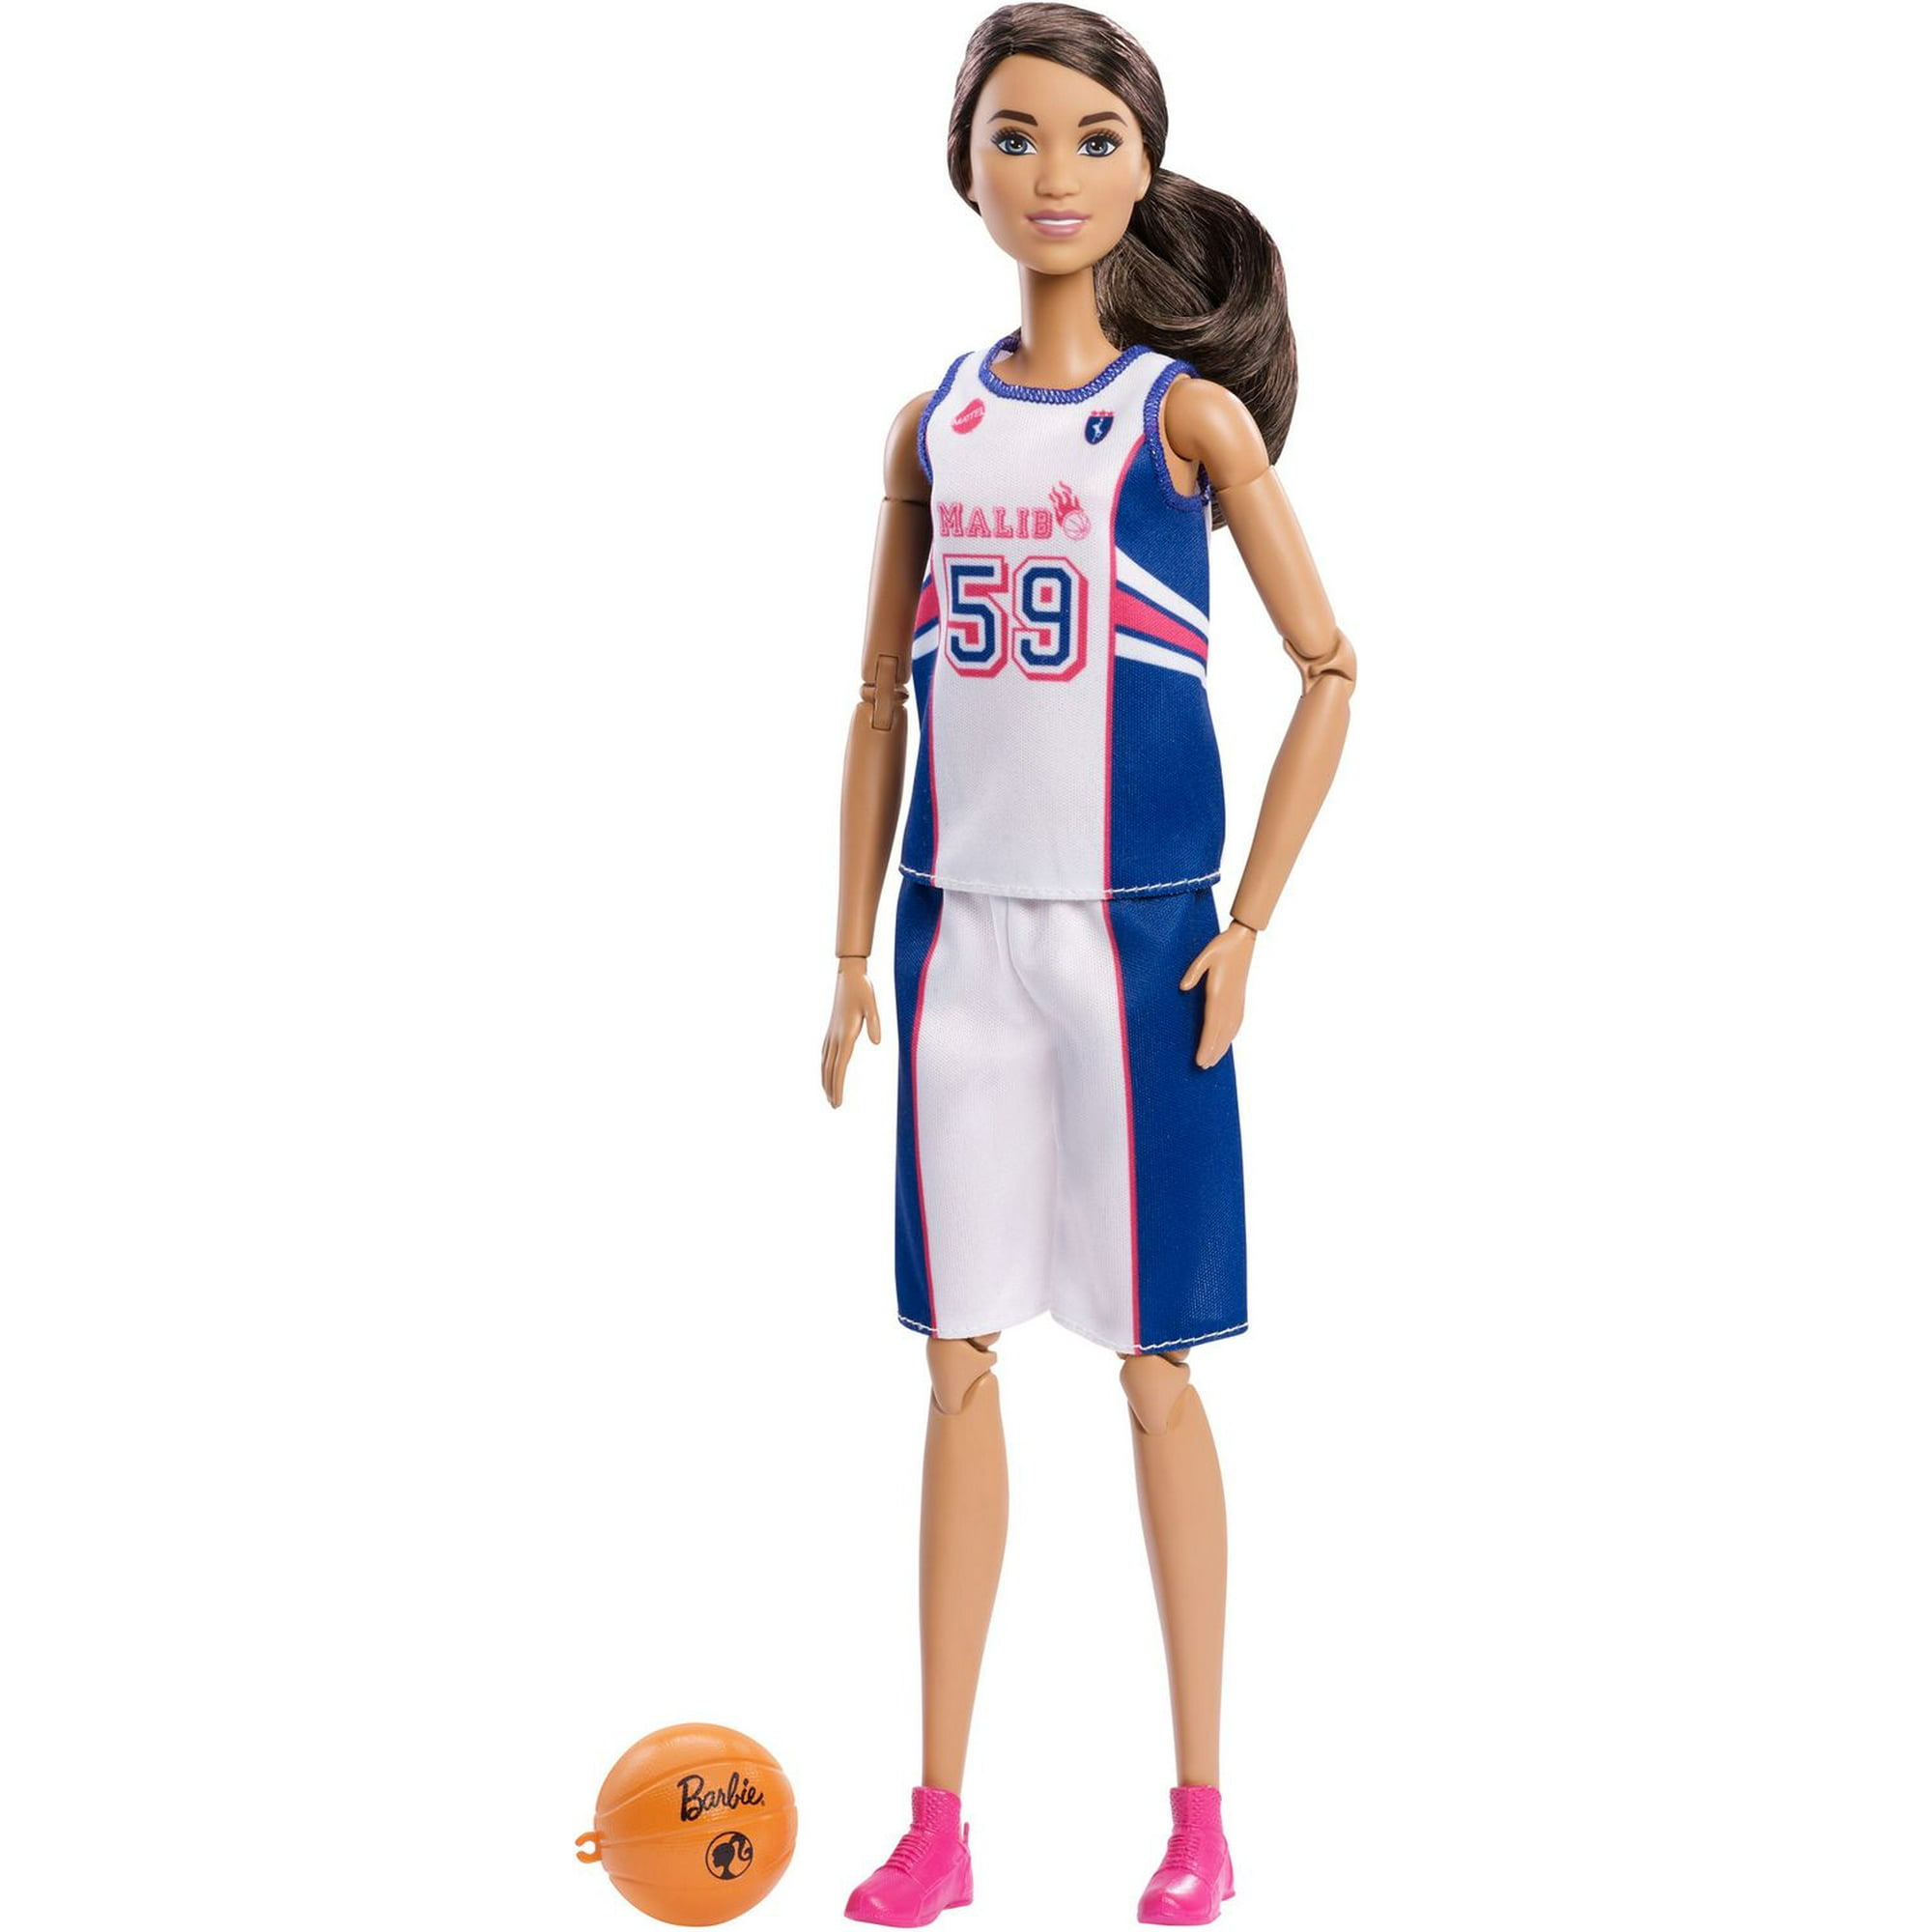 Barbie Made to Move Basketball Doll - Entertainment Earth